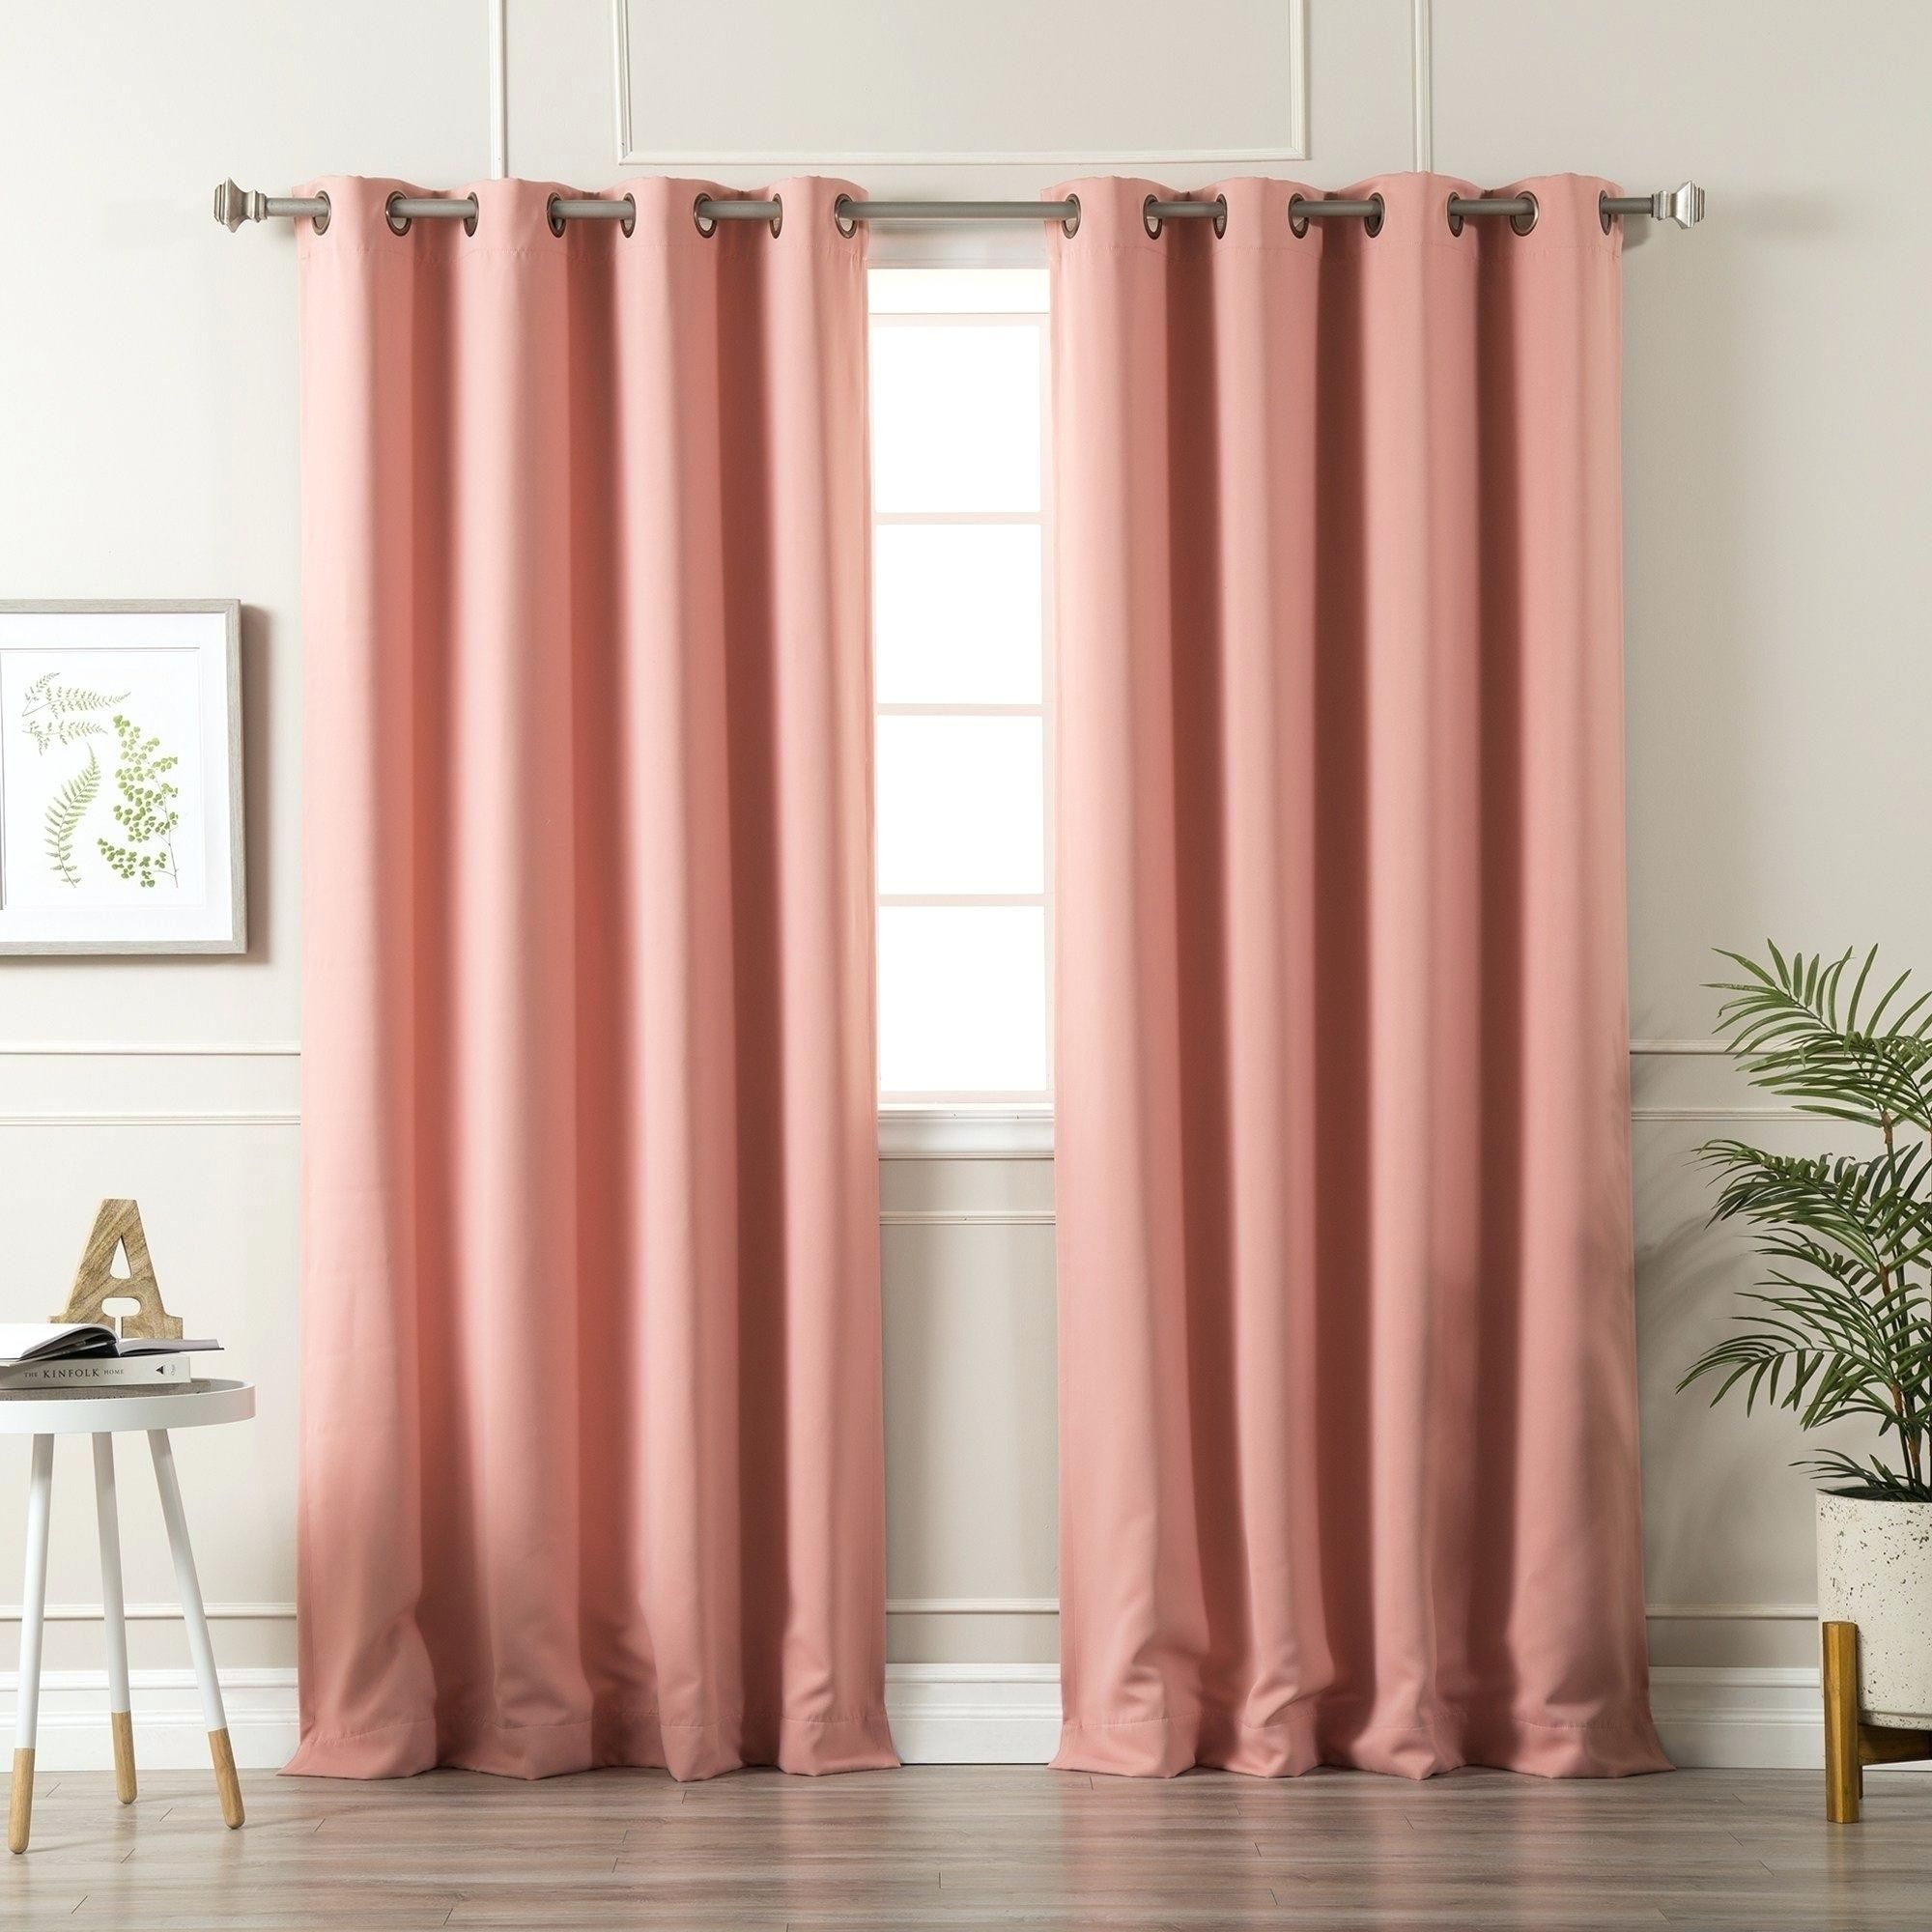 72 Thermal Curtains – Raphaelgroup With Regard To Solid Insulated Thermal Blackout Long Length Curtain Panel Pairs (View 21 of 30)